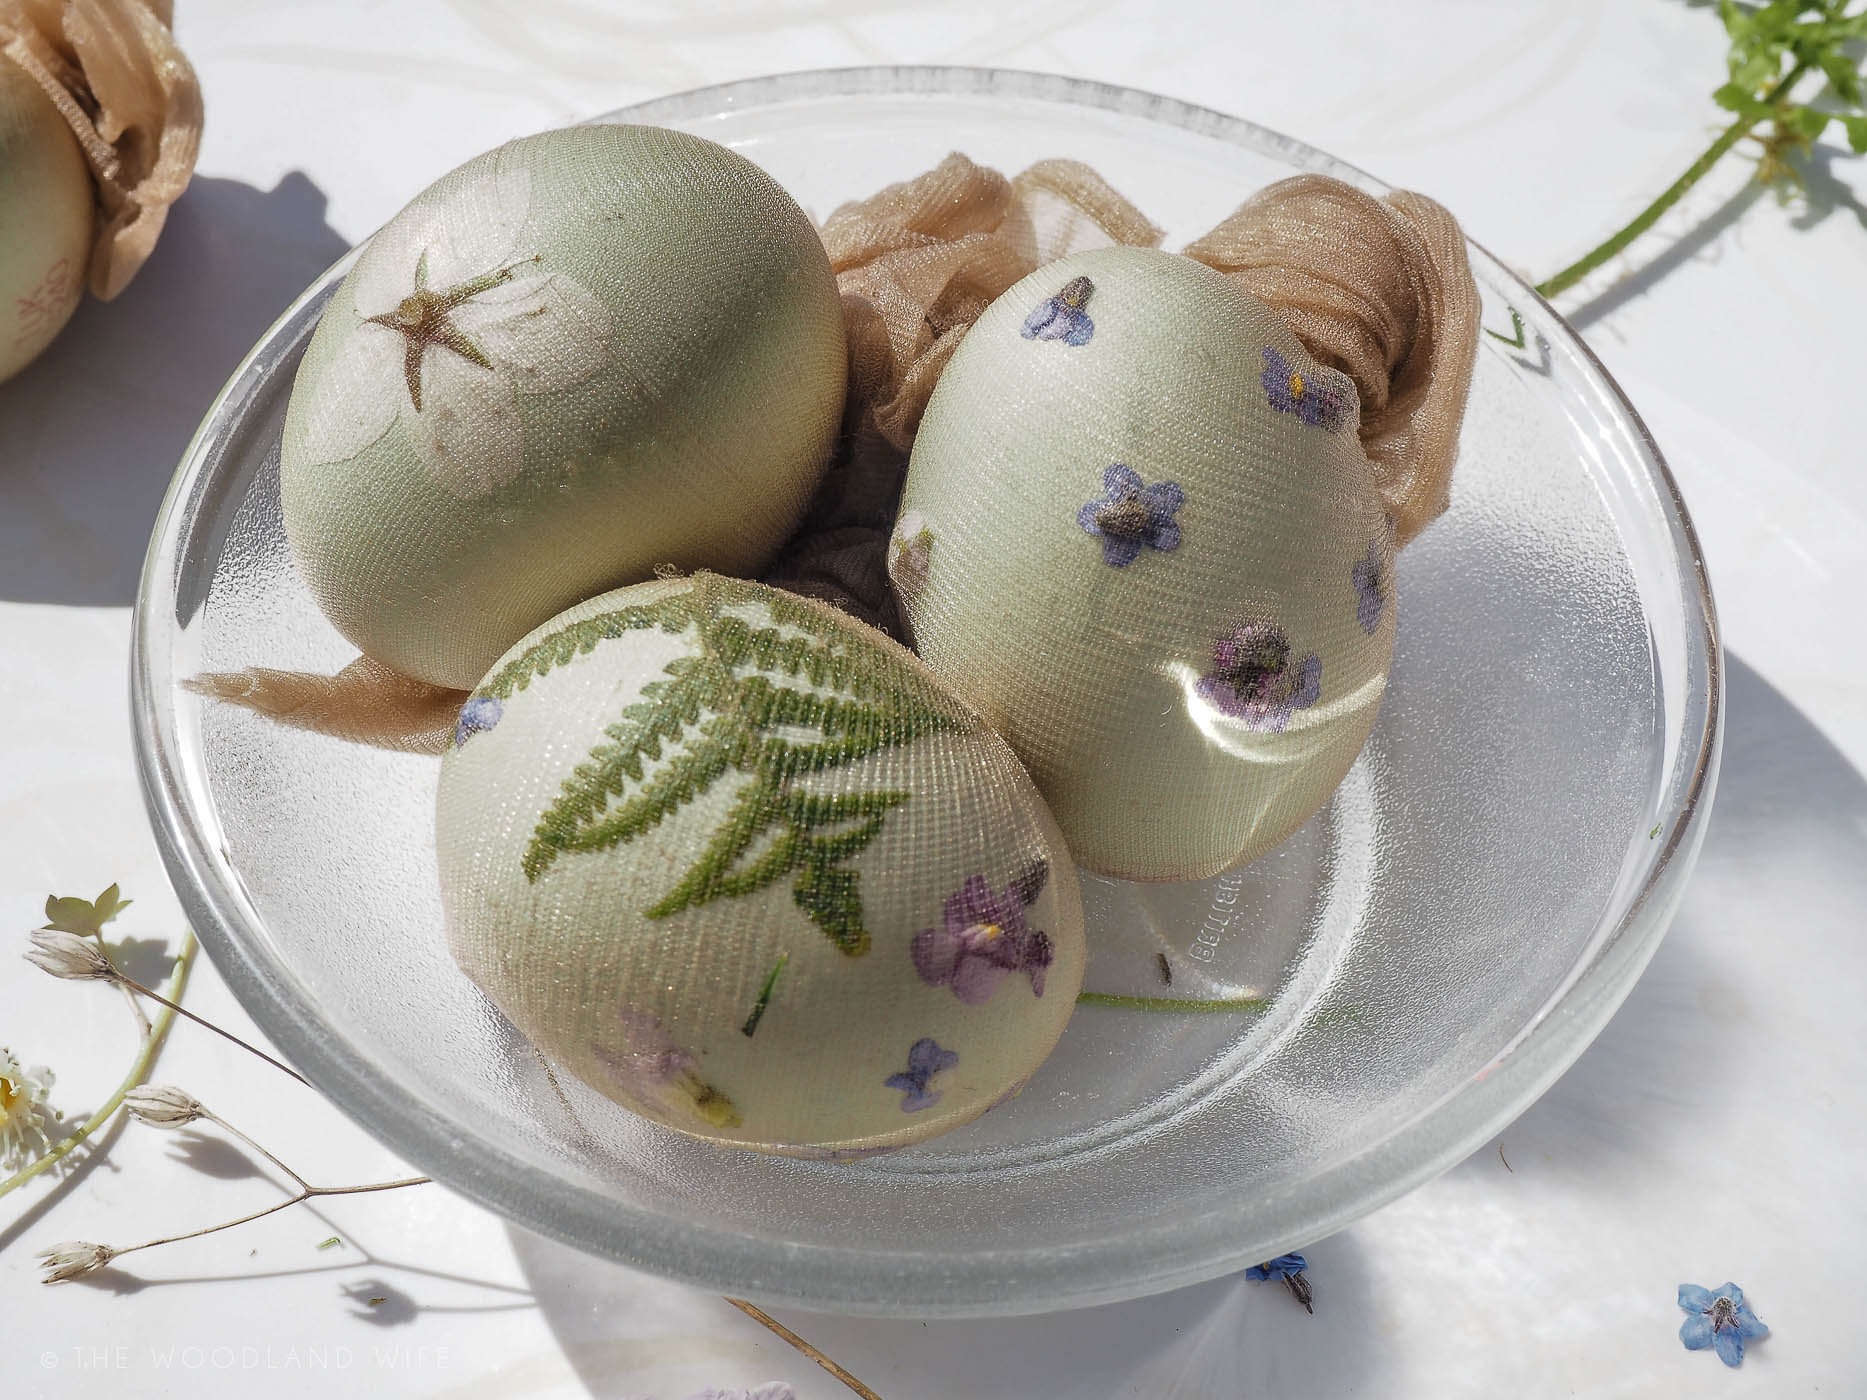 The Woodland Wife - Easter Crafting - Naturally Dyed Eggs with Onion Skins